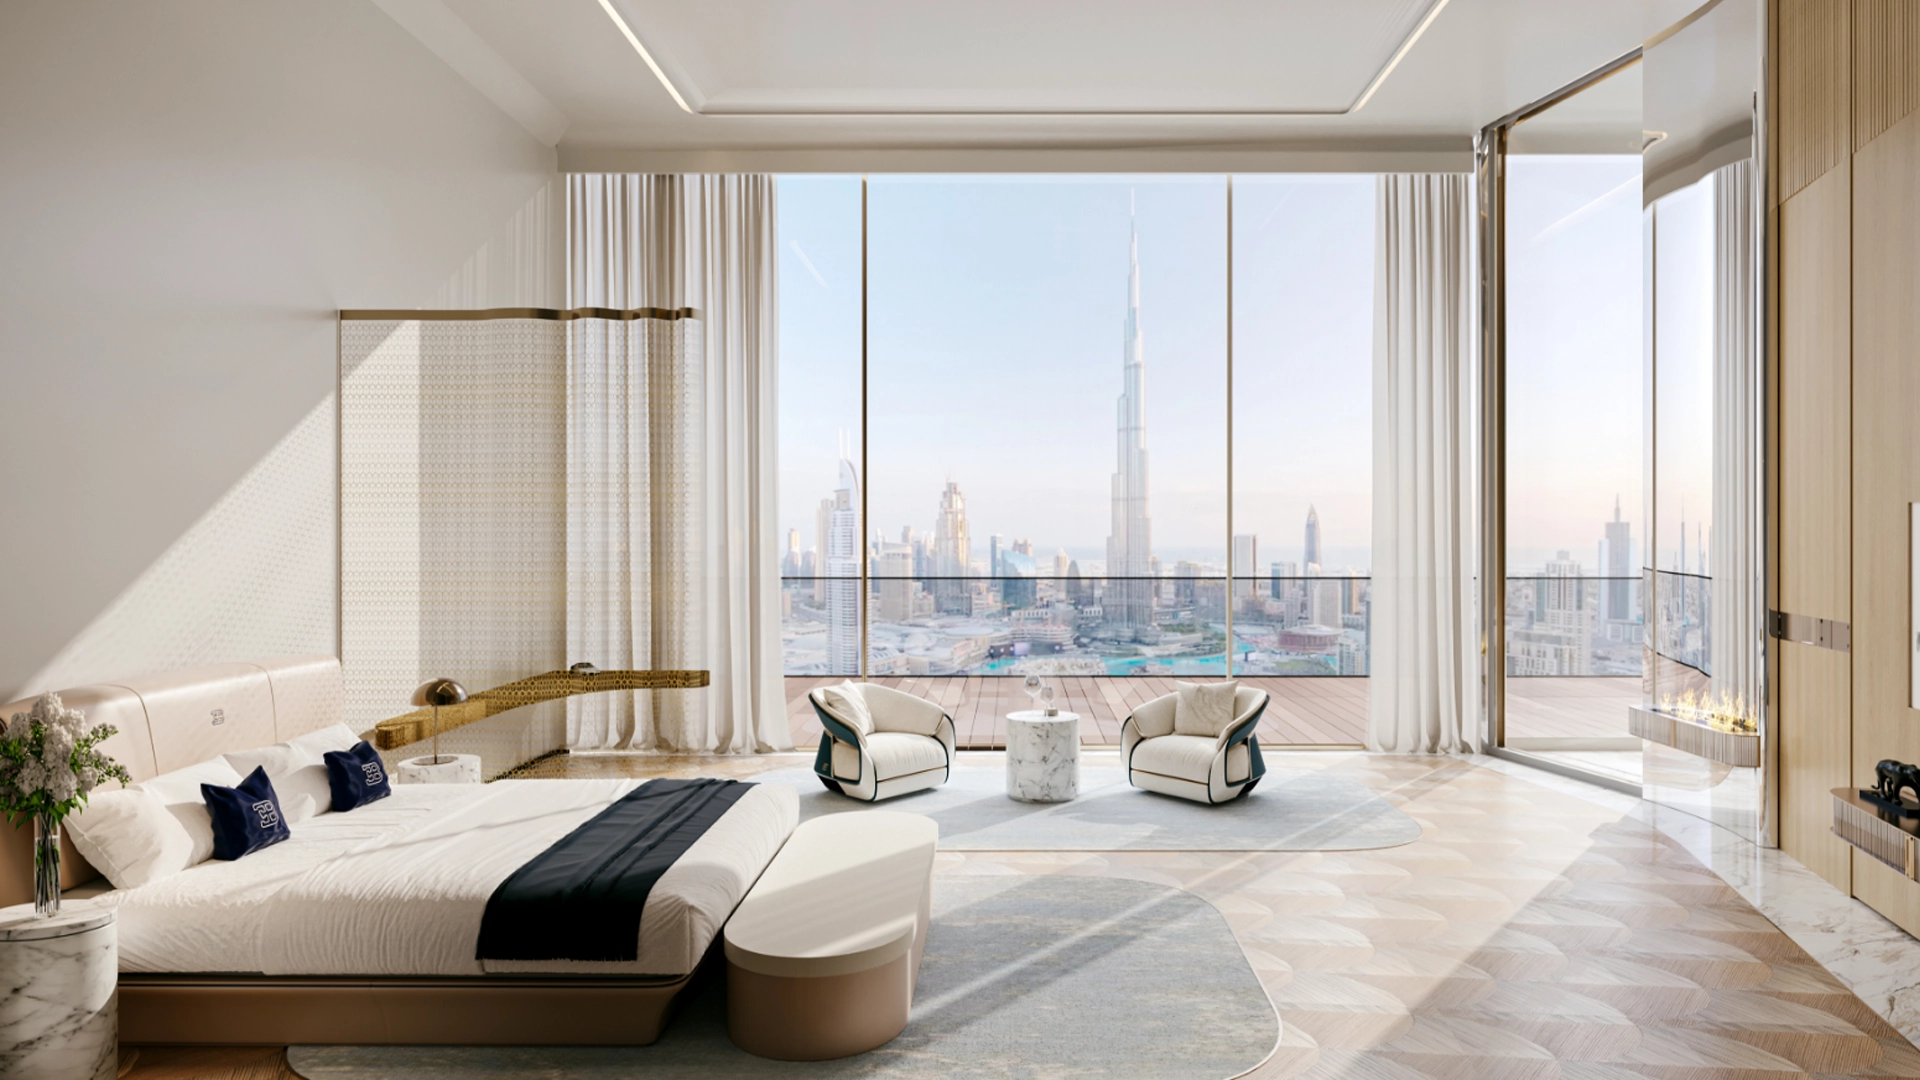 Edge-Realty-2 Bedroom Apartment for Sale in Bugatti Residences